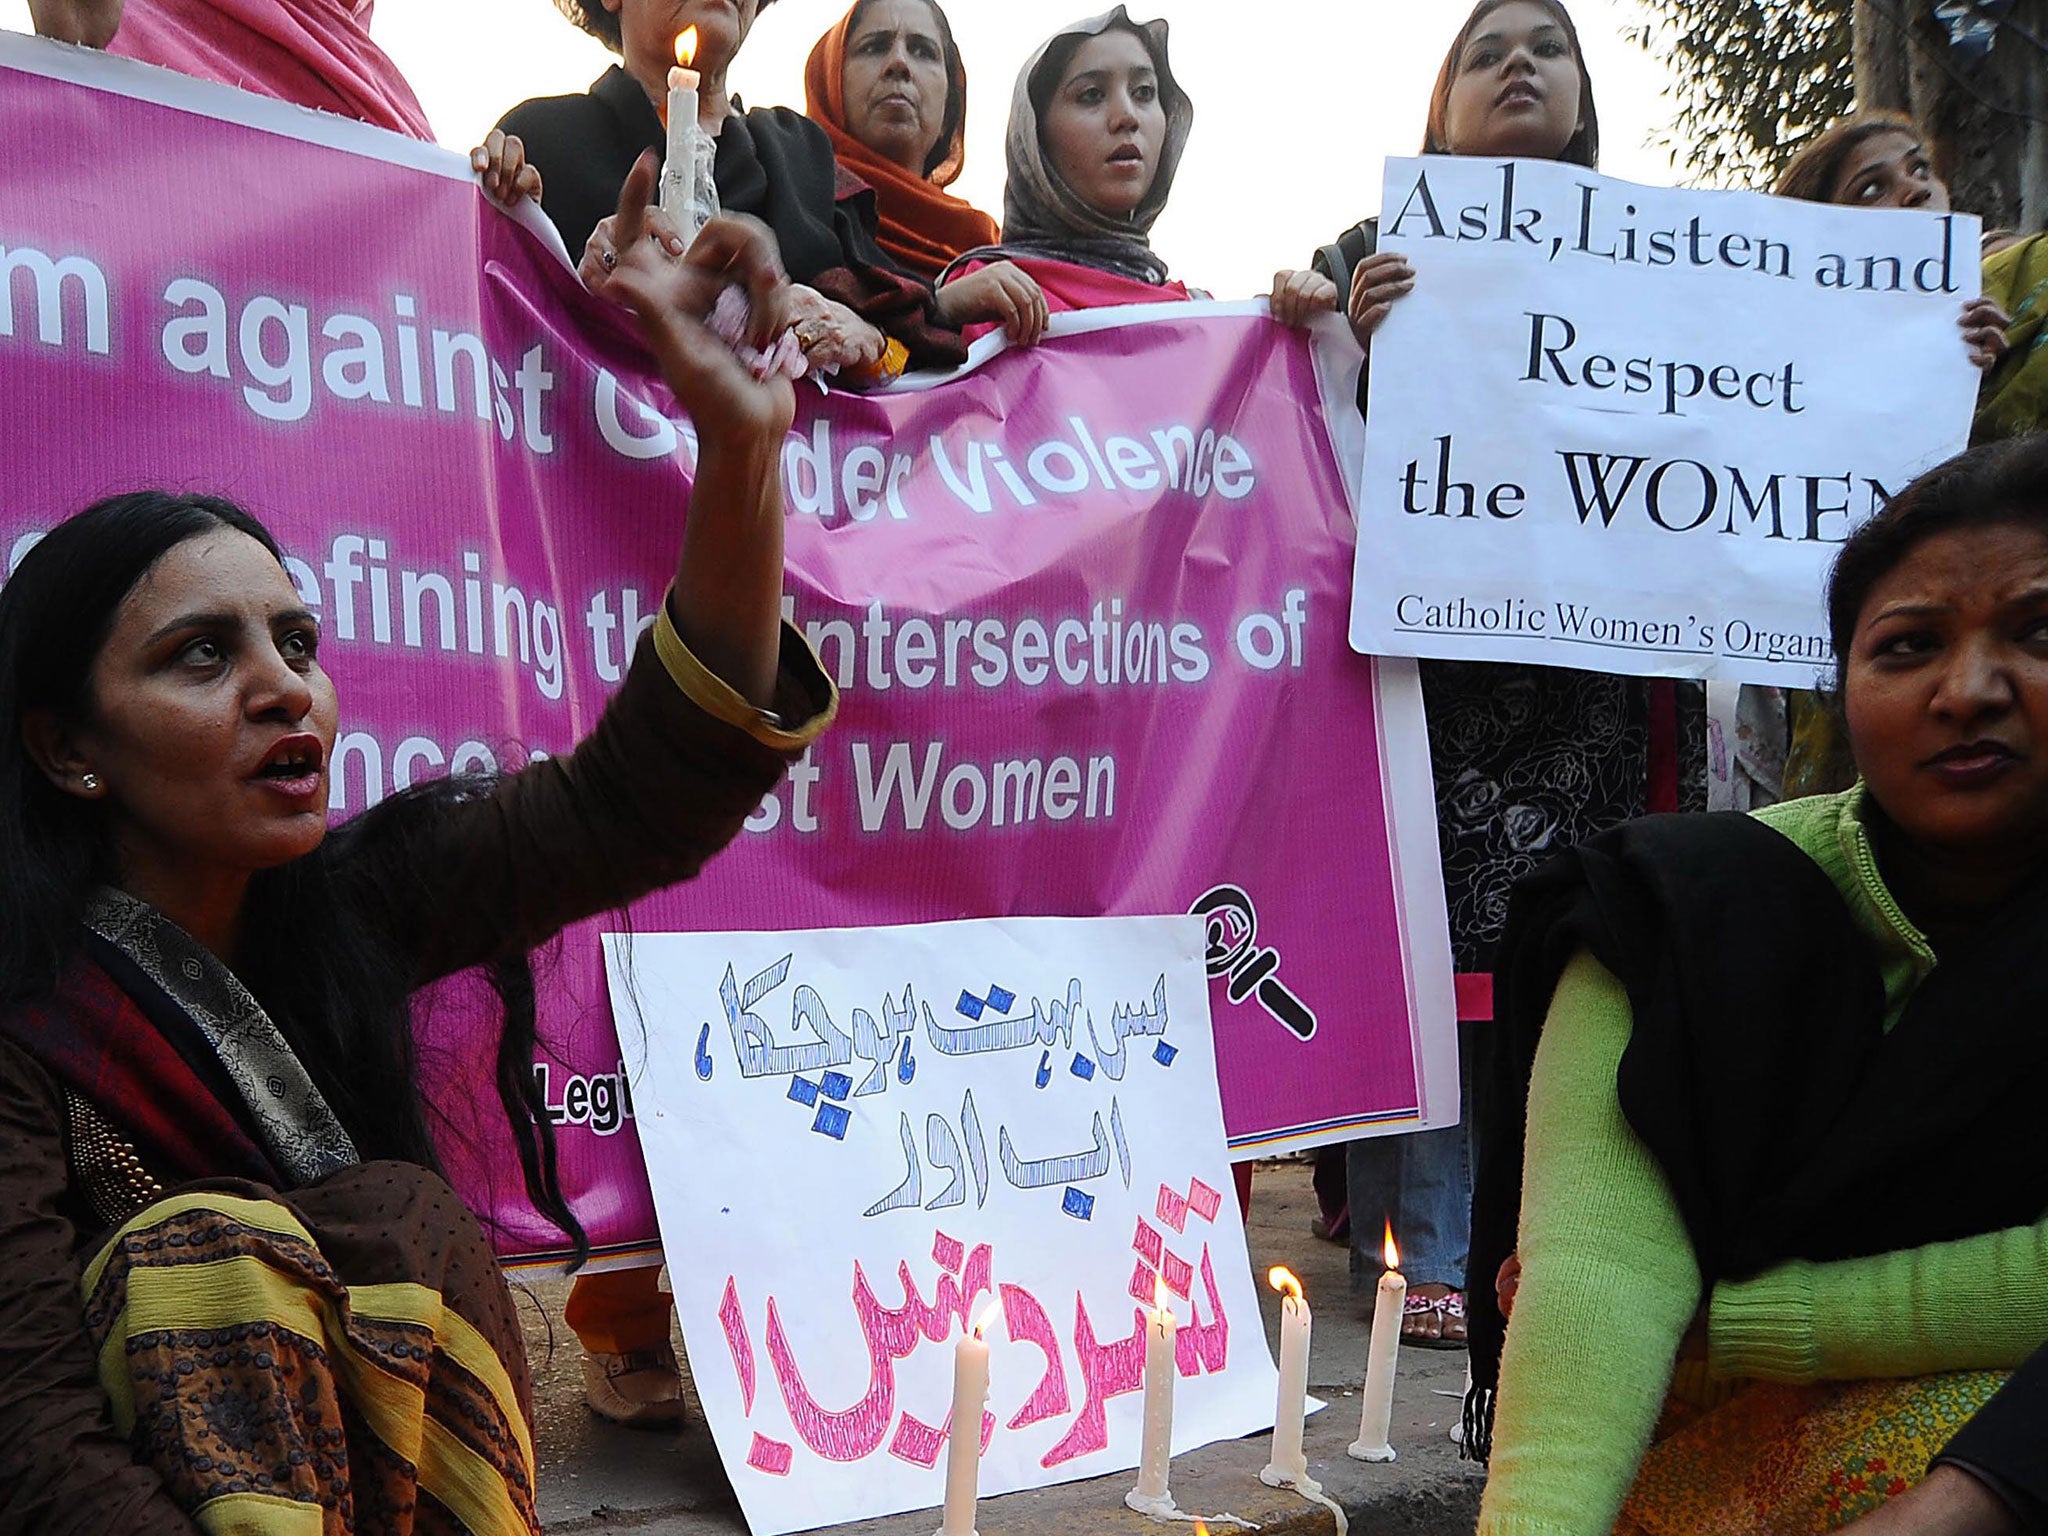 Pakistani women pose with candles to mark the International Day for the Elimination of Violence against Women in Lahore on November 25, 2010.